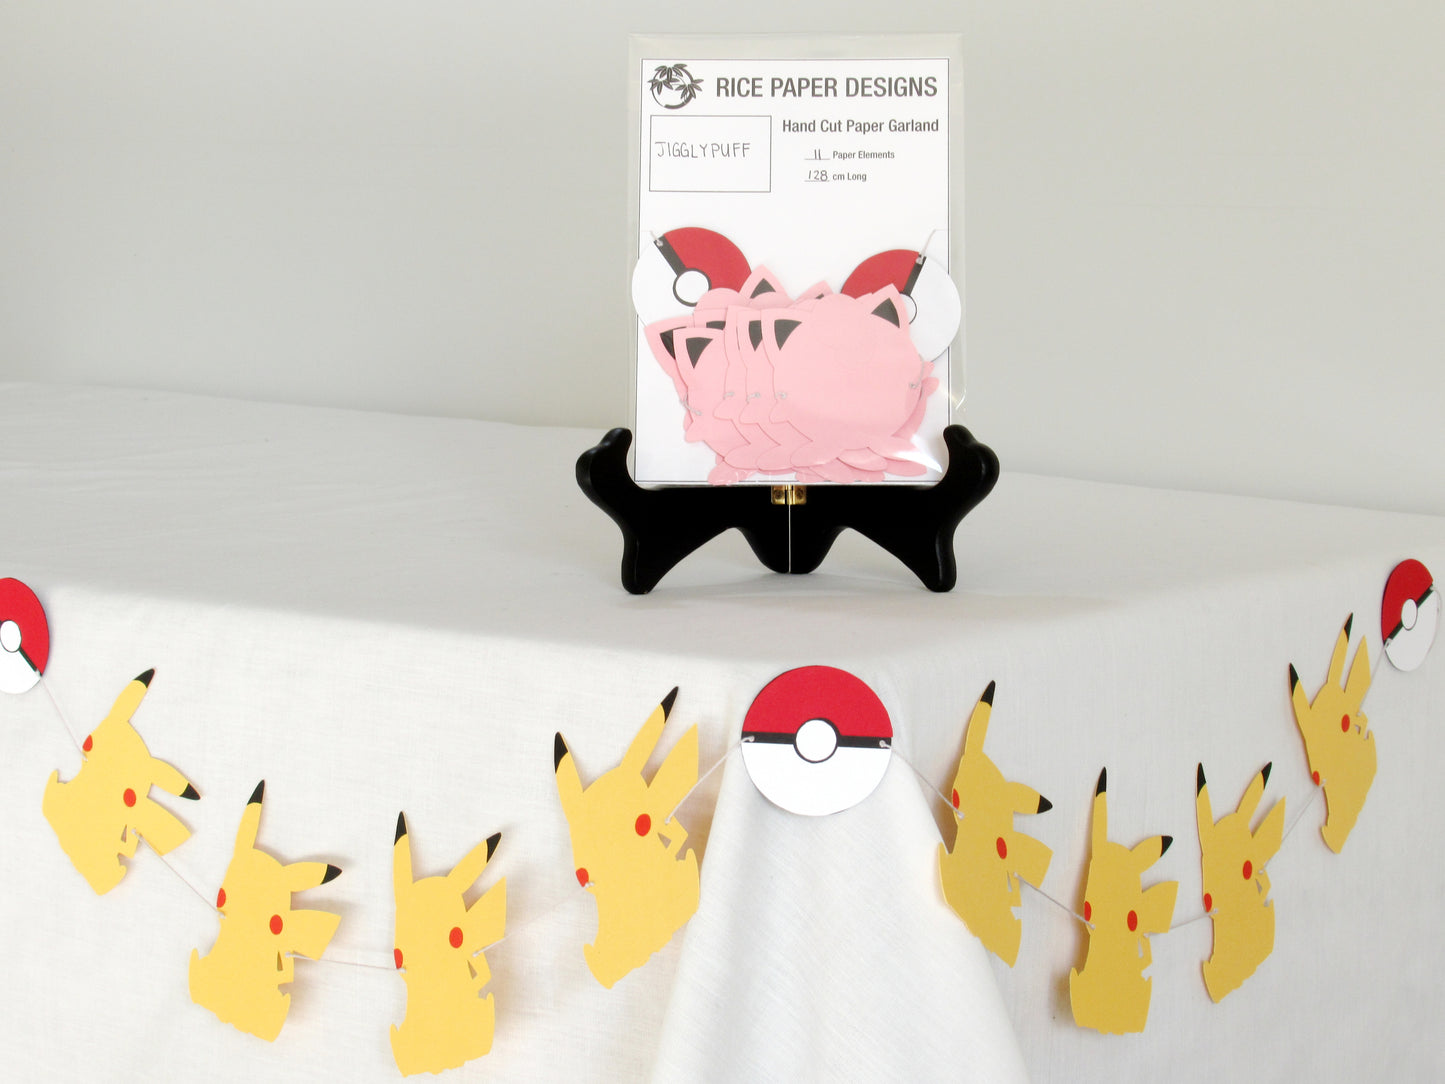 A garland with a series of paper jigglypuffs and pokeballs arranged in neat bundle inside a clear bag. There is a paper behind them showing the Rice Paper Designs logo, and information about the garland. The bag is on a table, and below it is a sample garland with pikachu hung up.